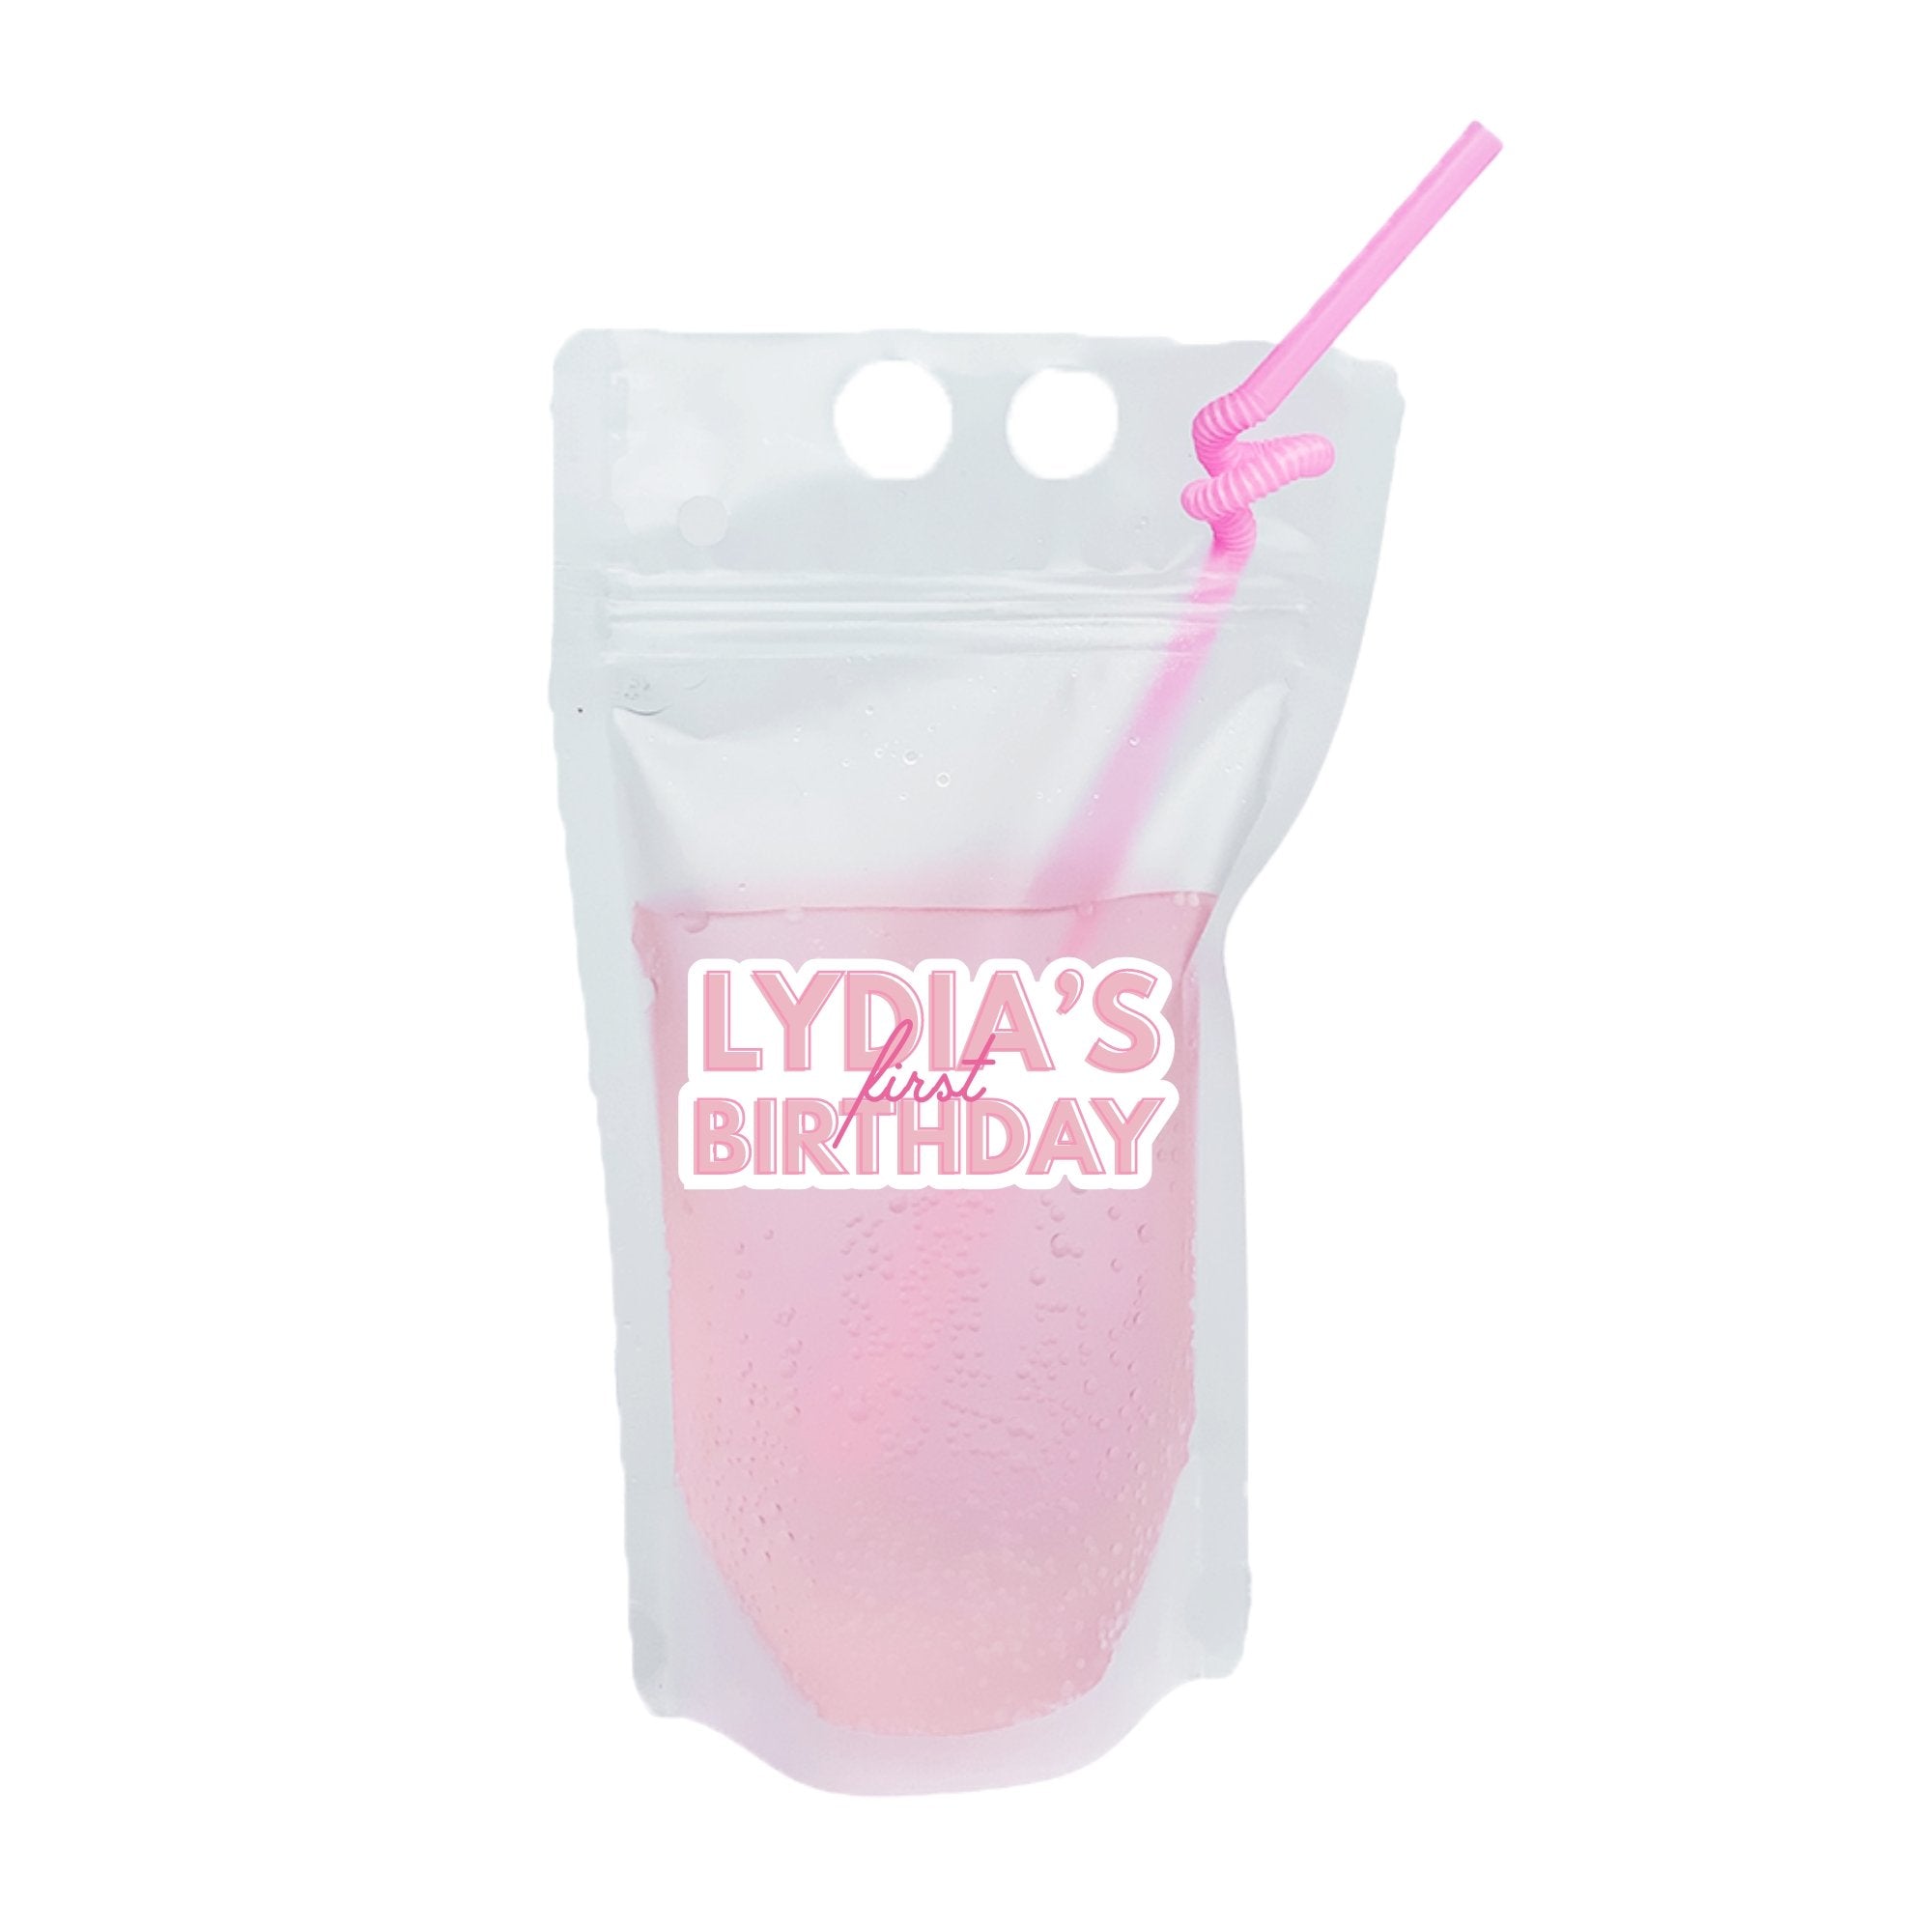 A party pouch is customized with a birthday design